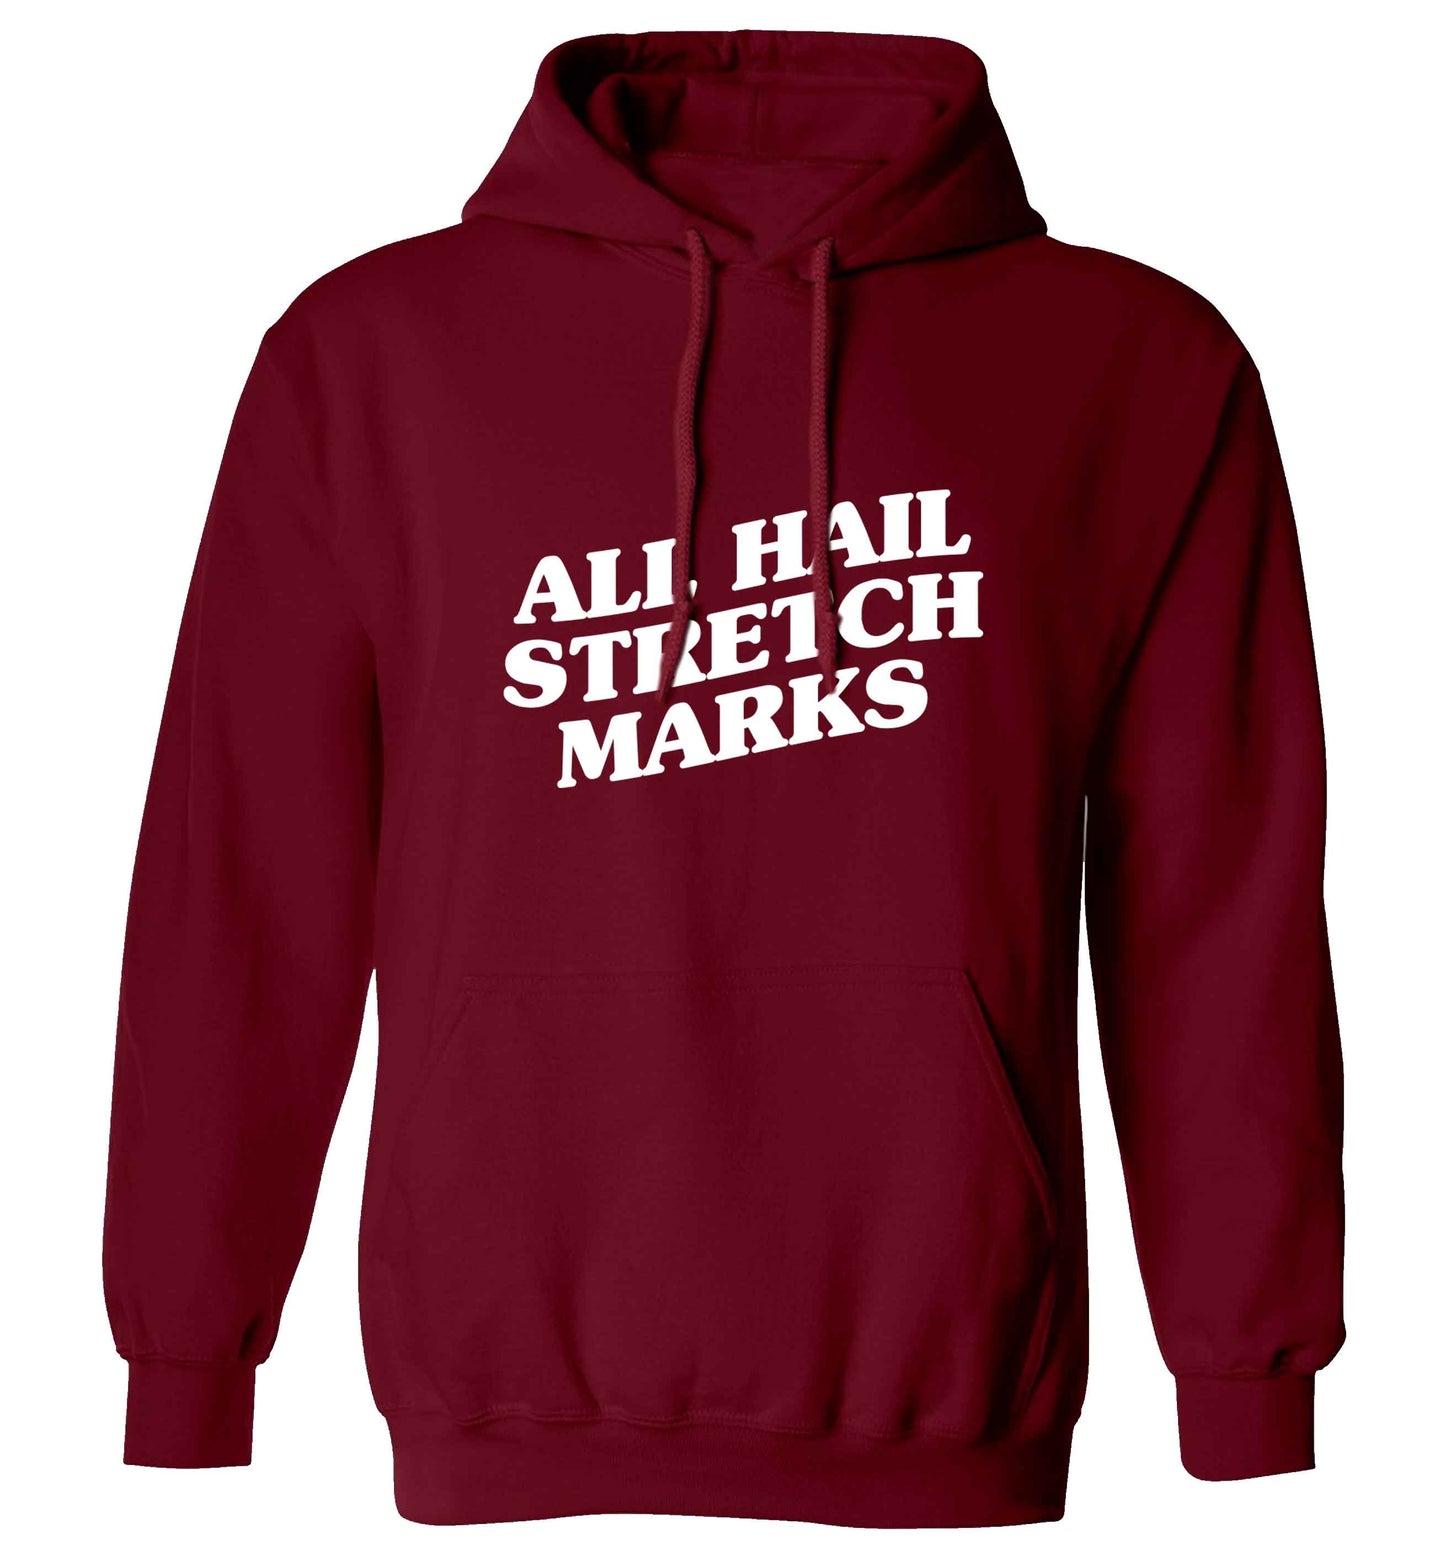 All hail stretch marks adults unisex maroon hoodie 2XL